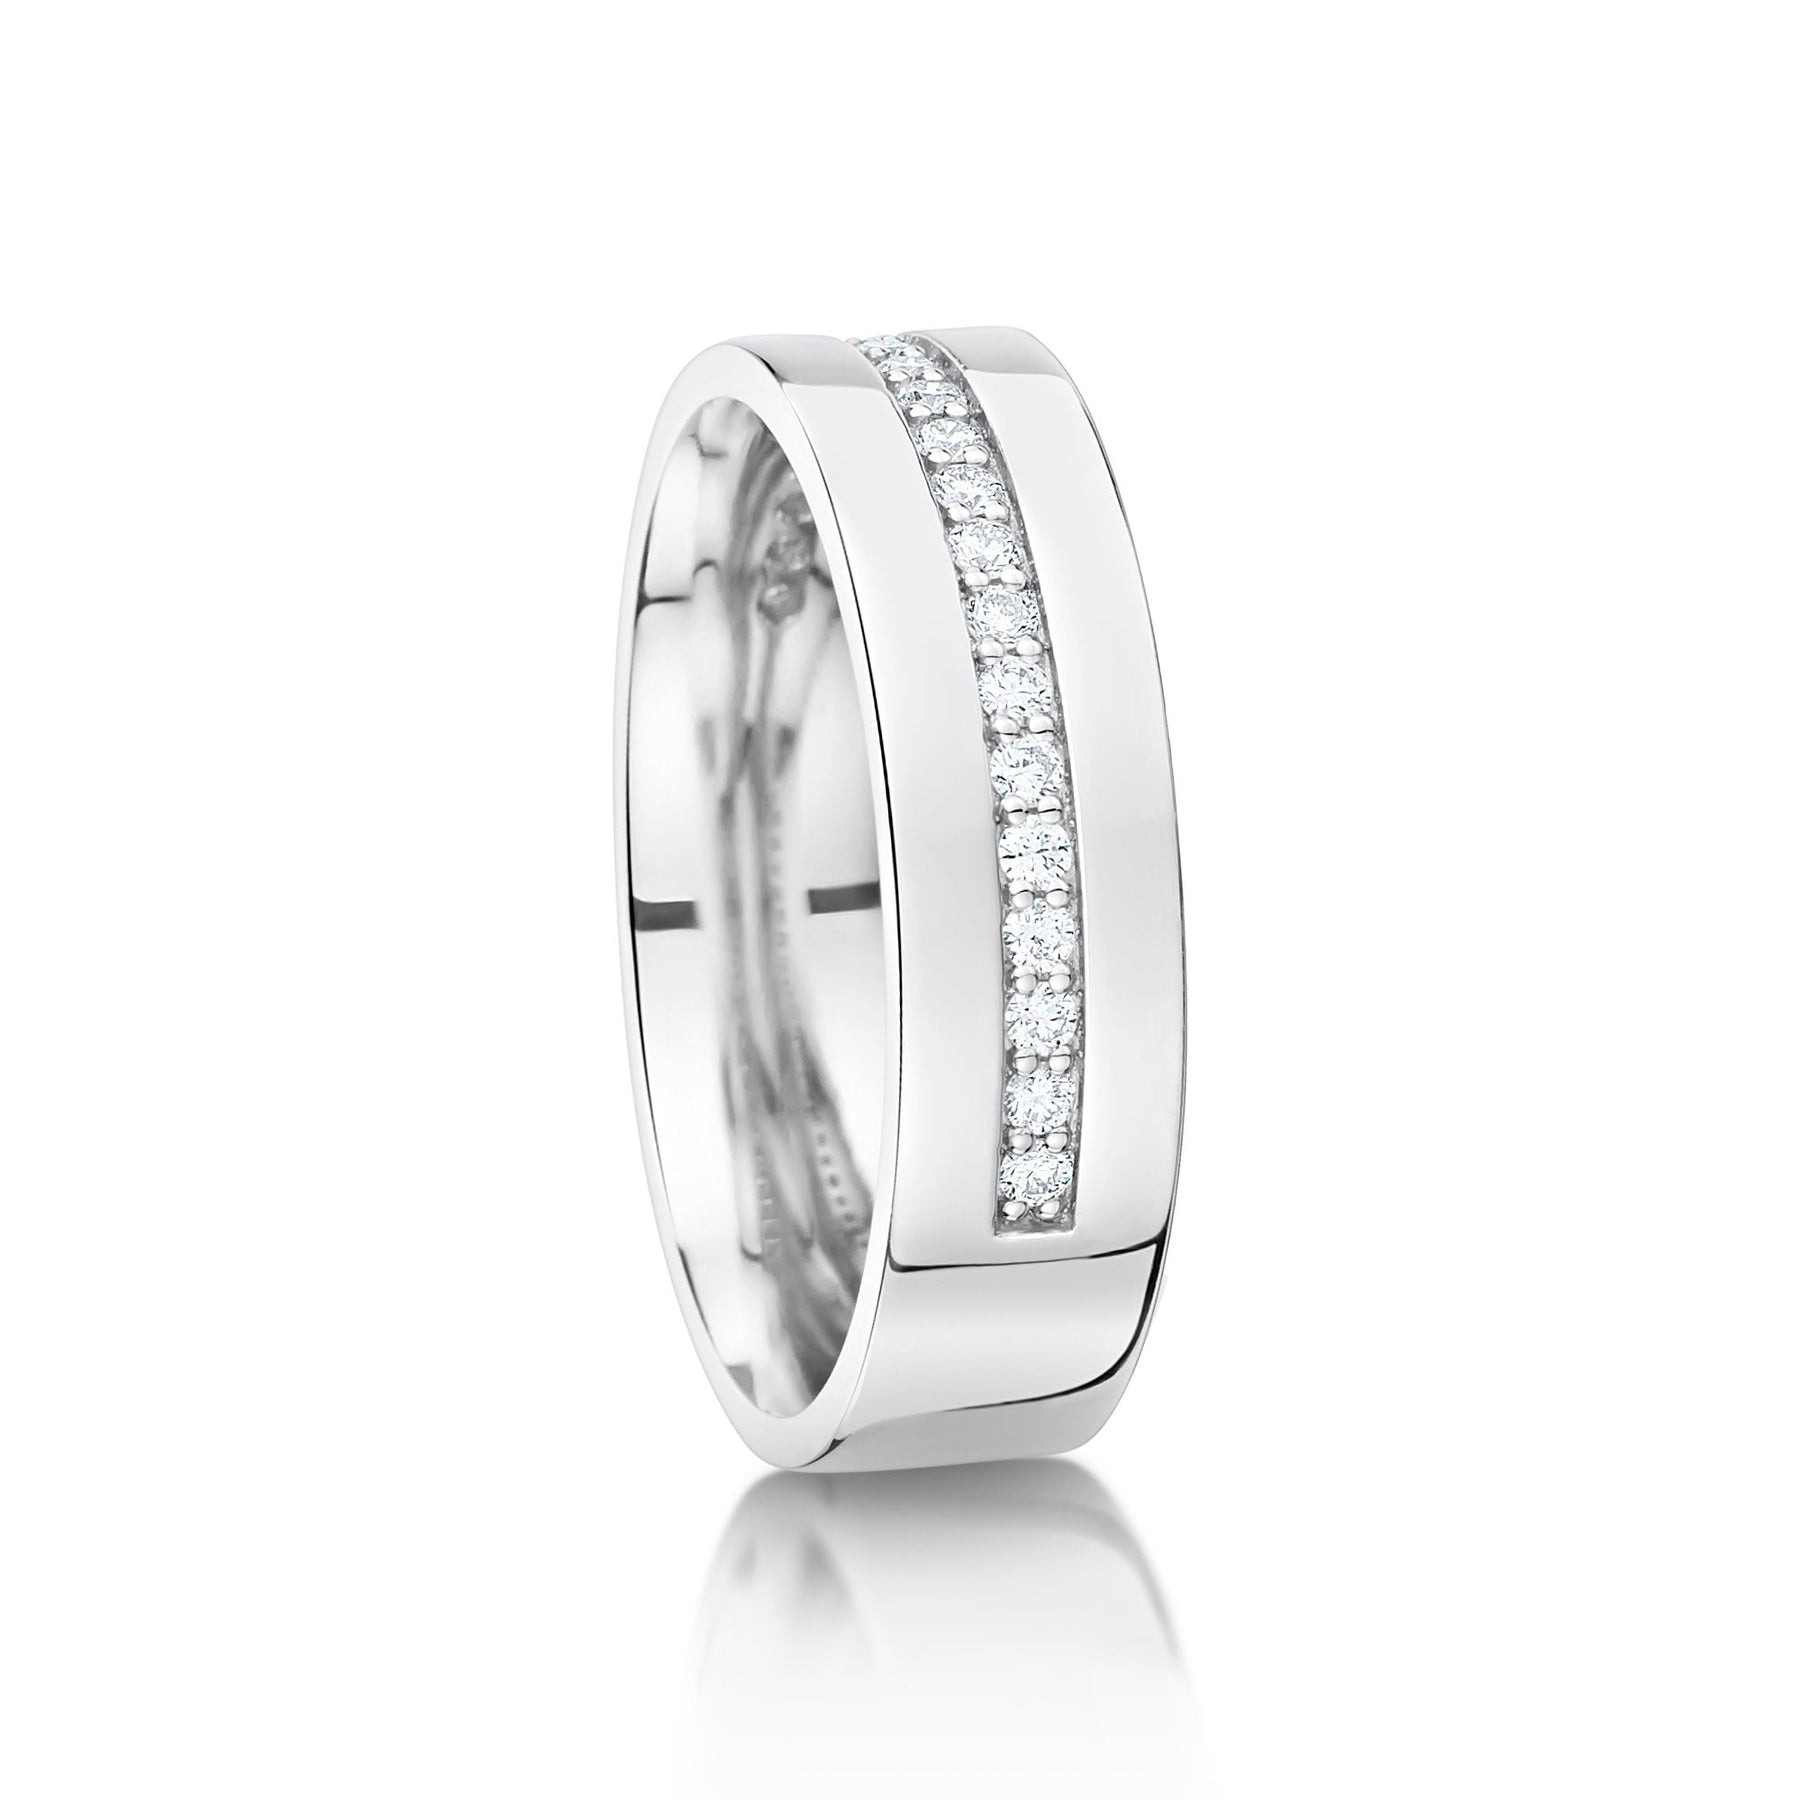 Mens Diamond Wedding Ring with diamonds in the centre